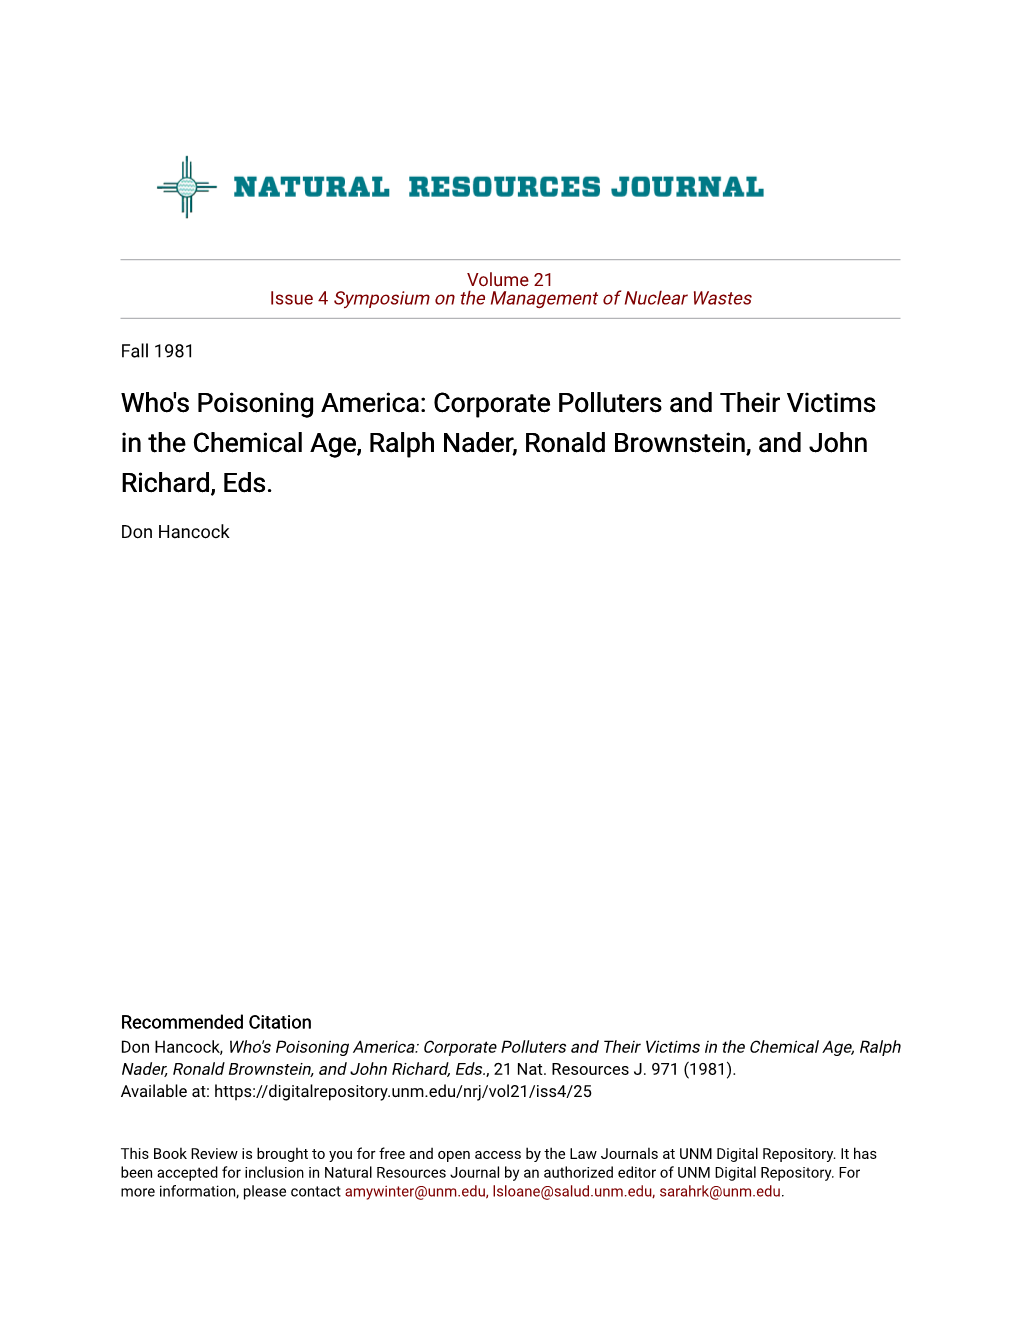 Who's Poisoning America: Corporate Polluters and Their Victims in the Chemical Age, Ralph Nader, Ronald Brownstein, and John Richard, Eds